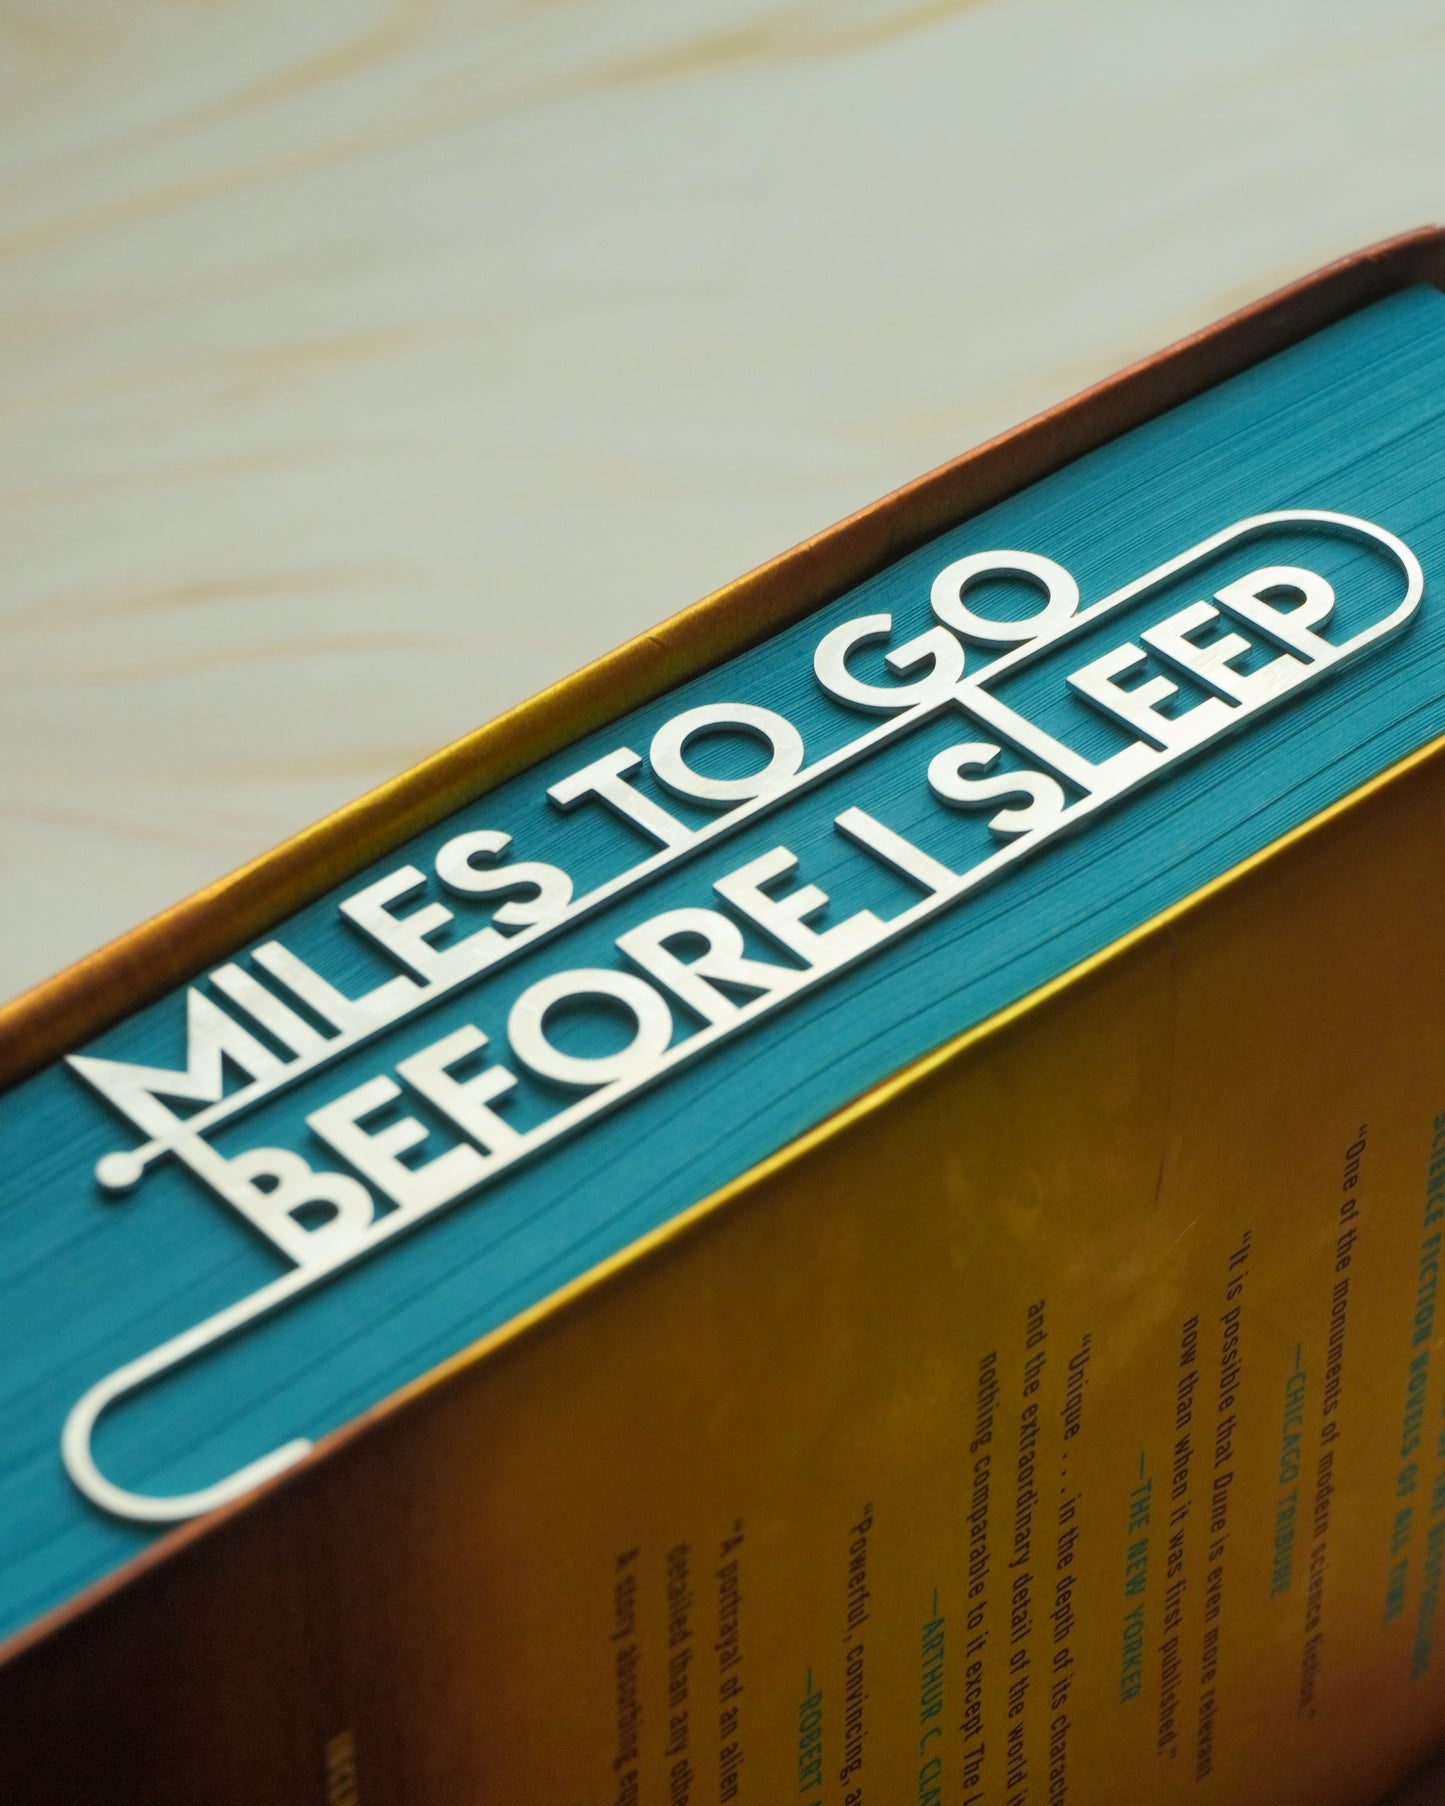 "Miles to go before I sleep" Stainless Steel Metal Bookmark